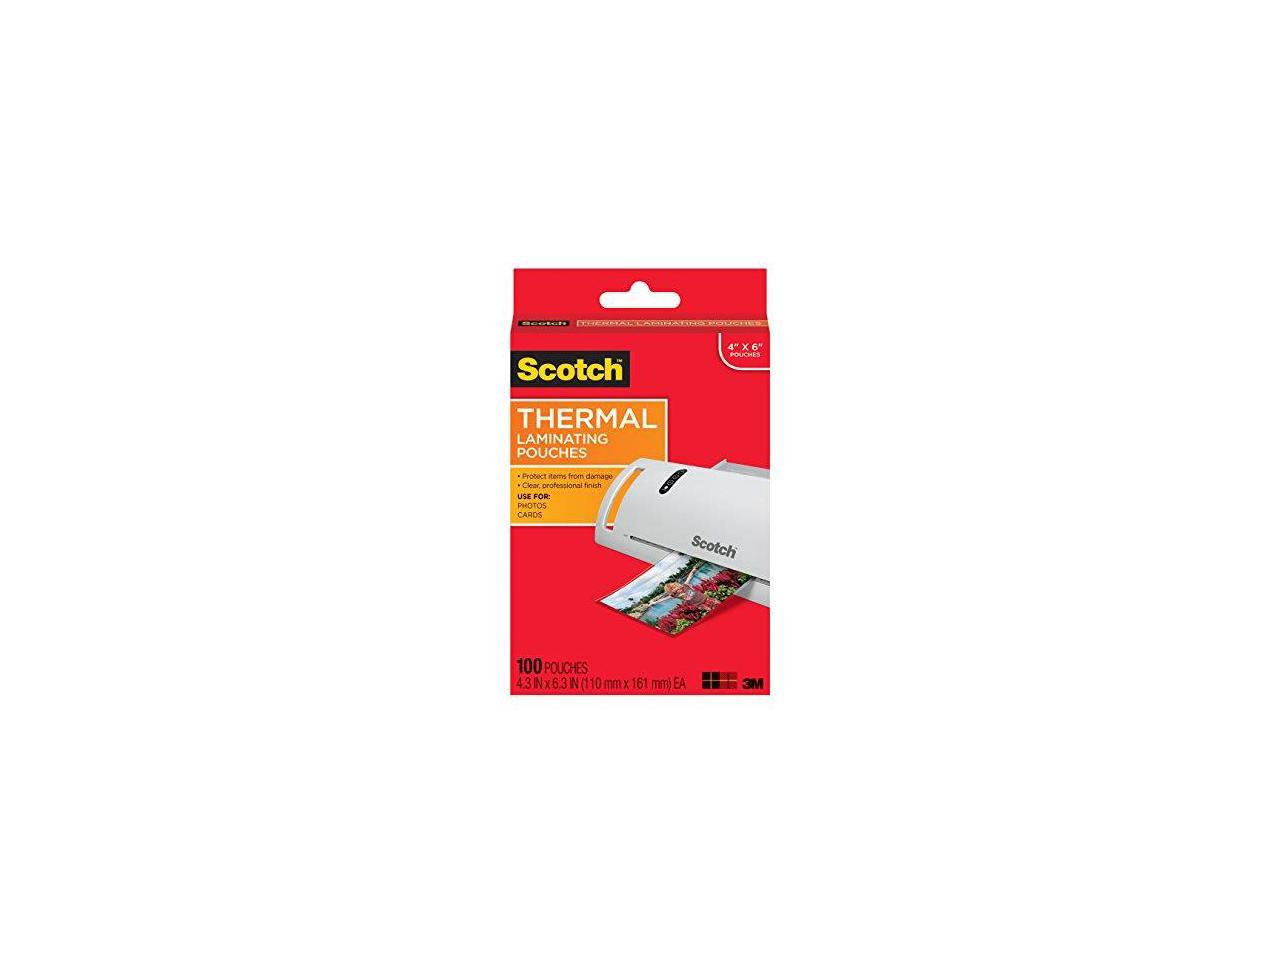 Scotch Thermal Laminating Pouches 4x6 100 Pack Tp5900 100 